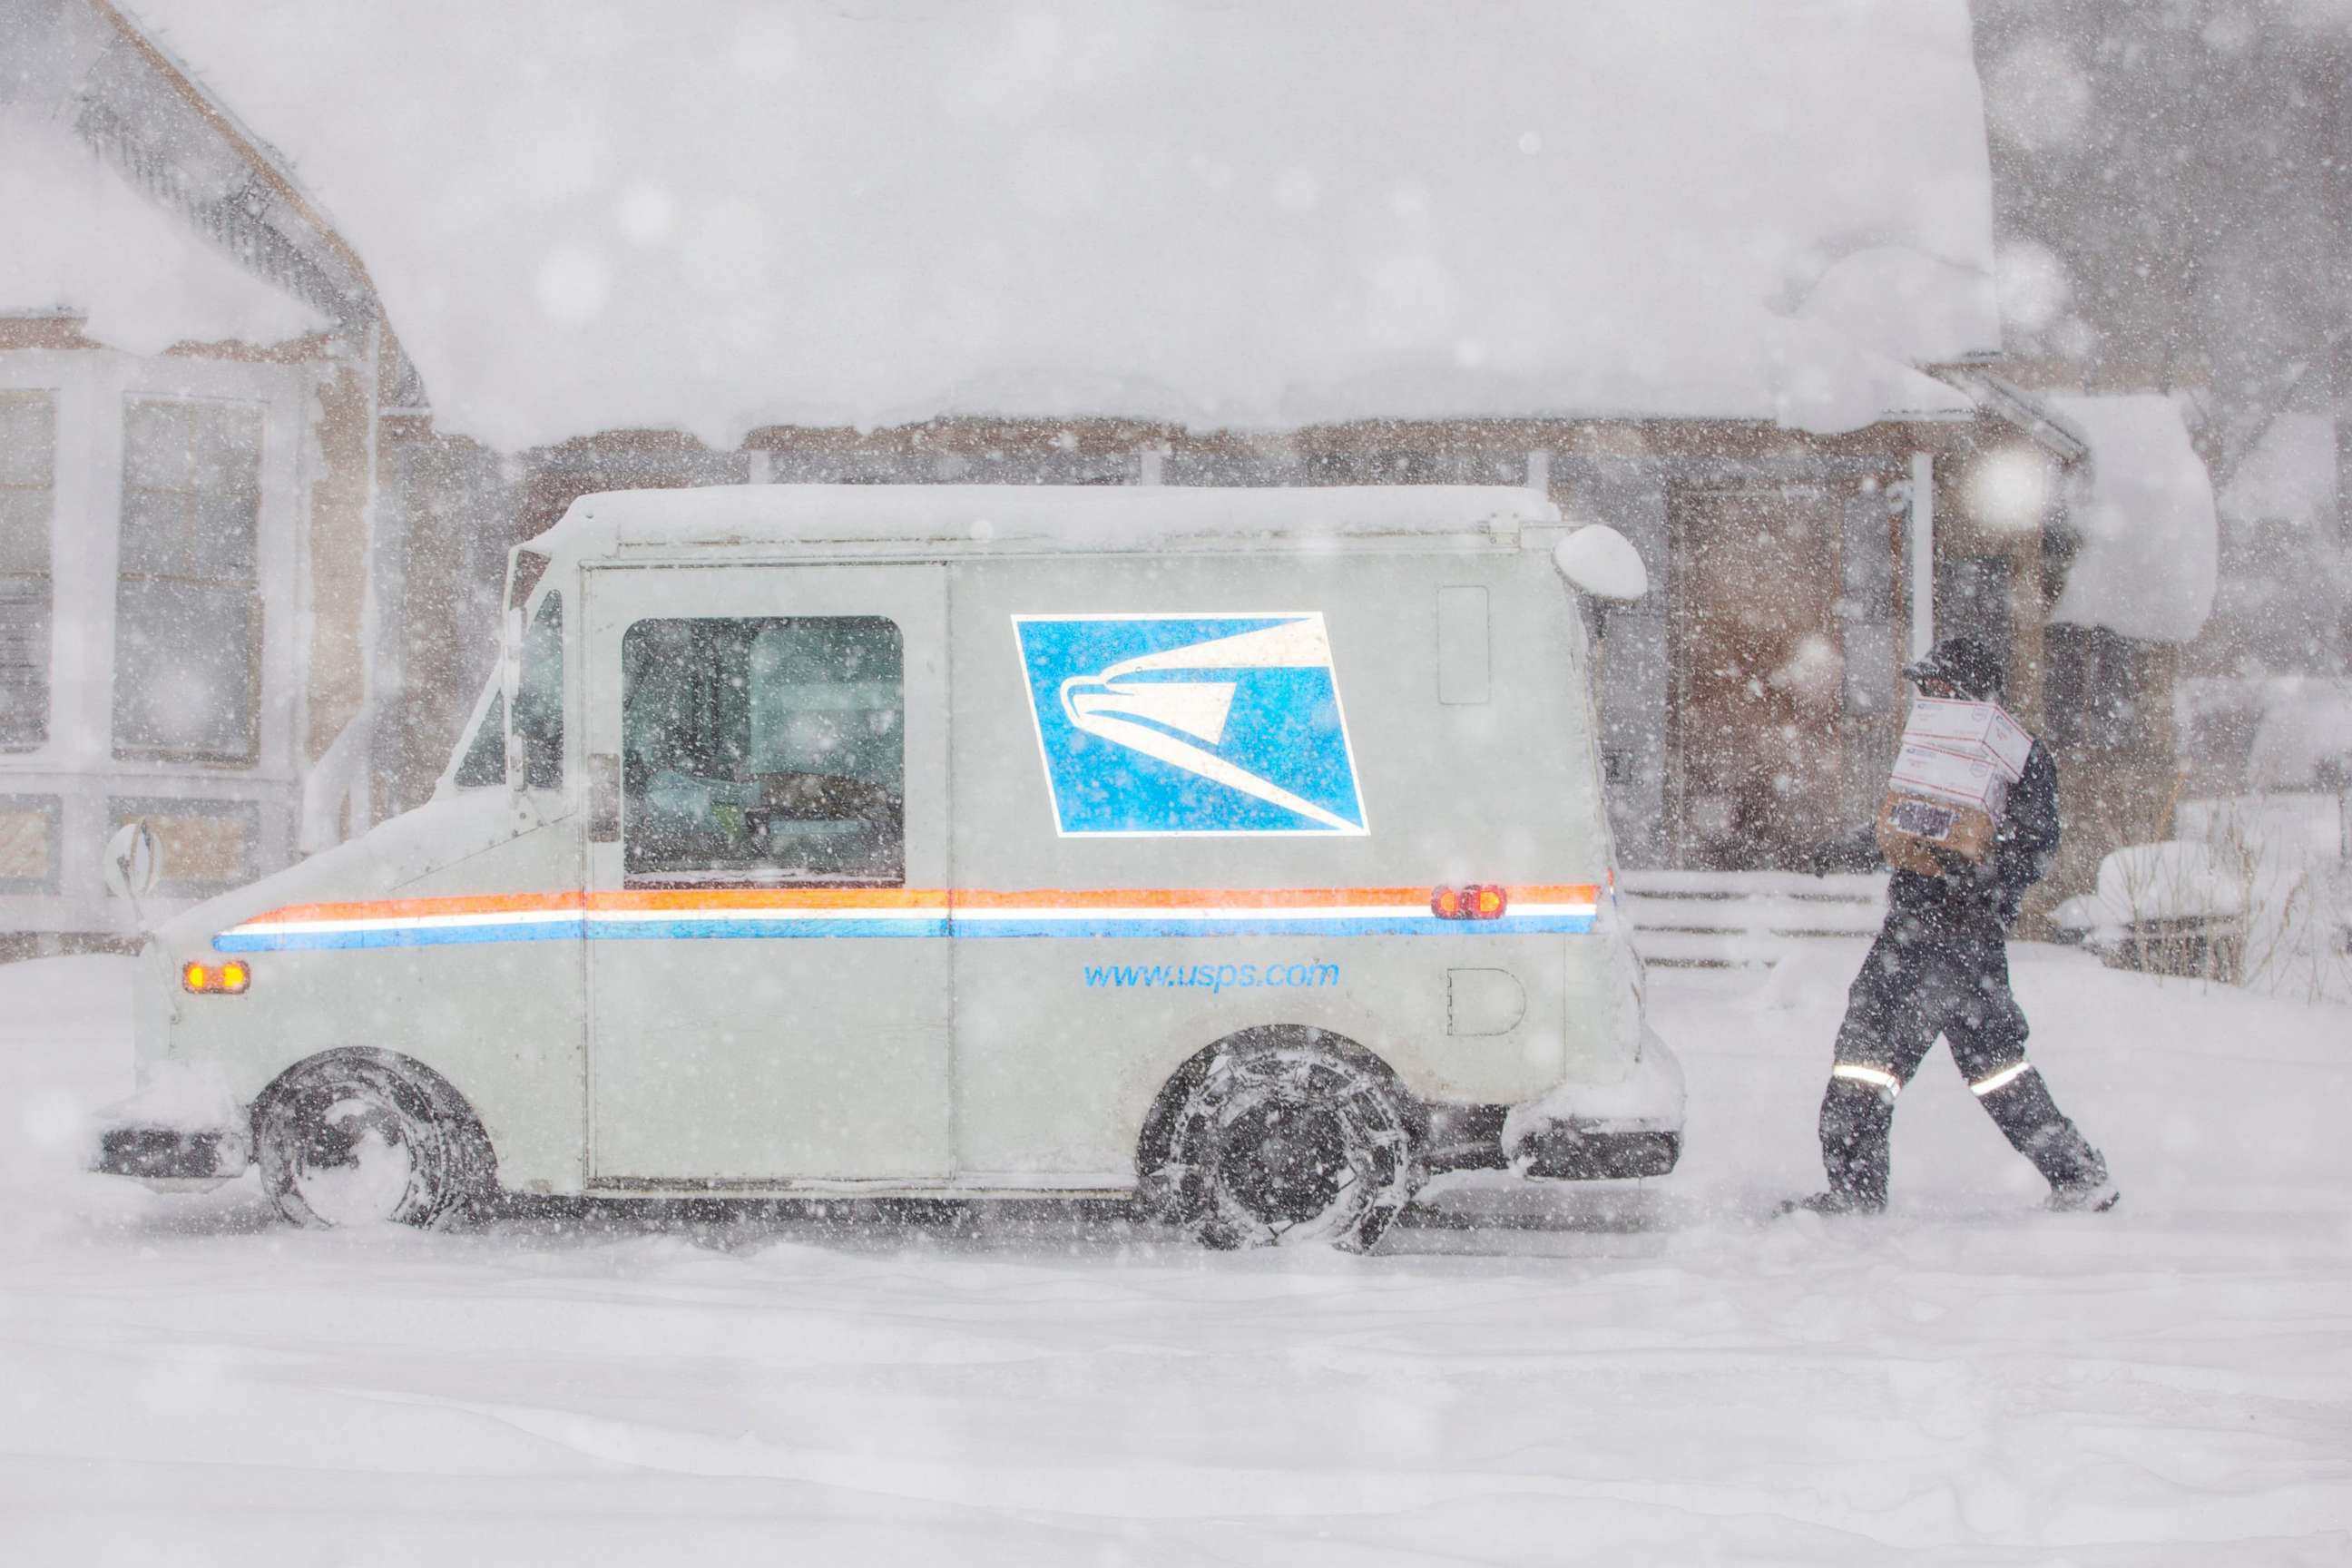 PHOTO: A United States Postal Service worker delivers mail in the snow in Flagstaff on Jan. 25, 2021.

Jan 25 2021 Flagstaff Snow Day